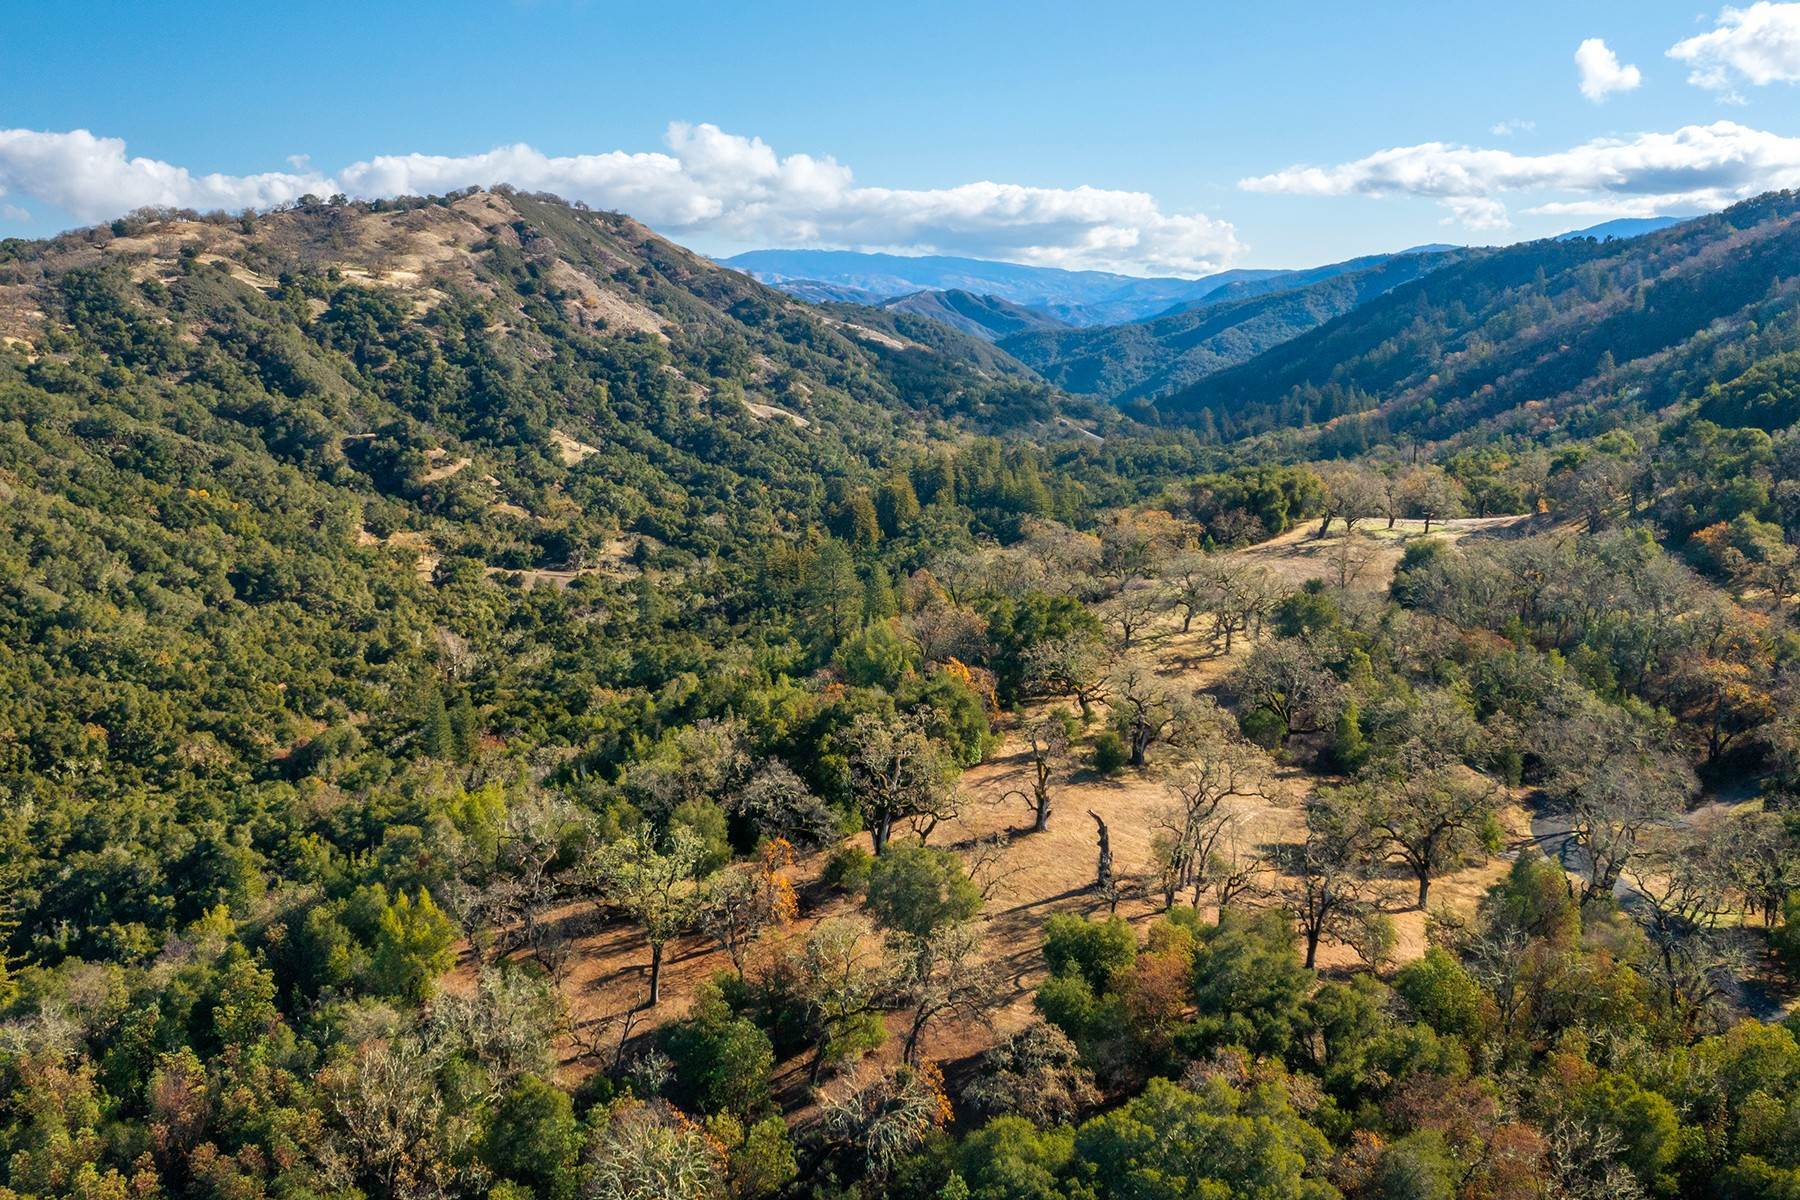 Property for Sale at 37 Arroyo Sequoia (Lot 113) Carmel, California 93923 United States